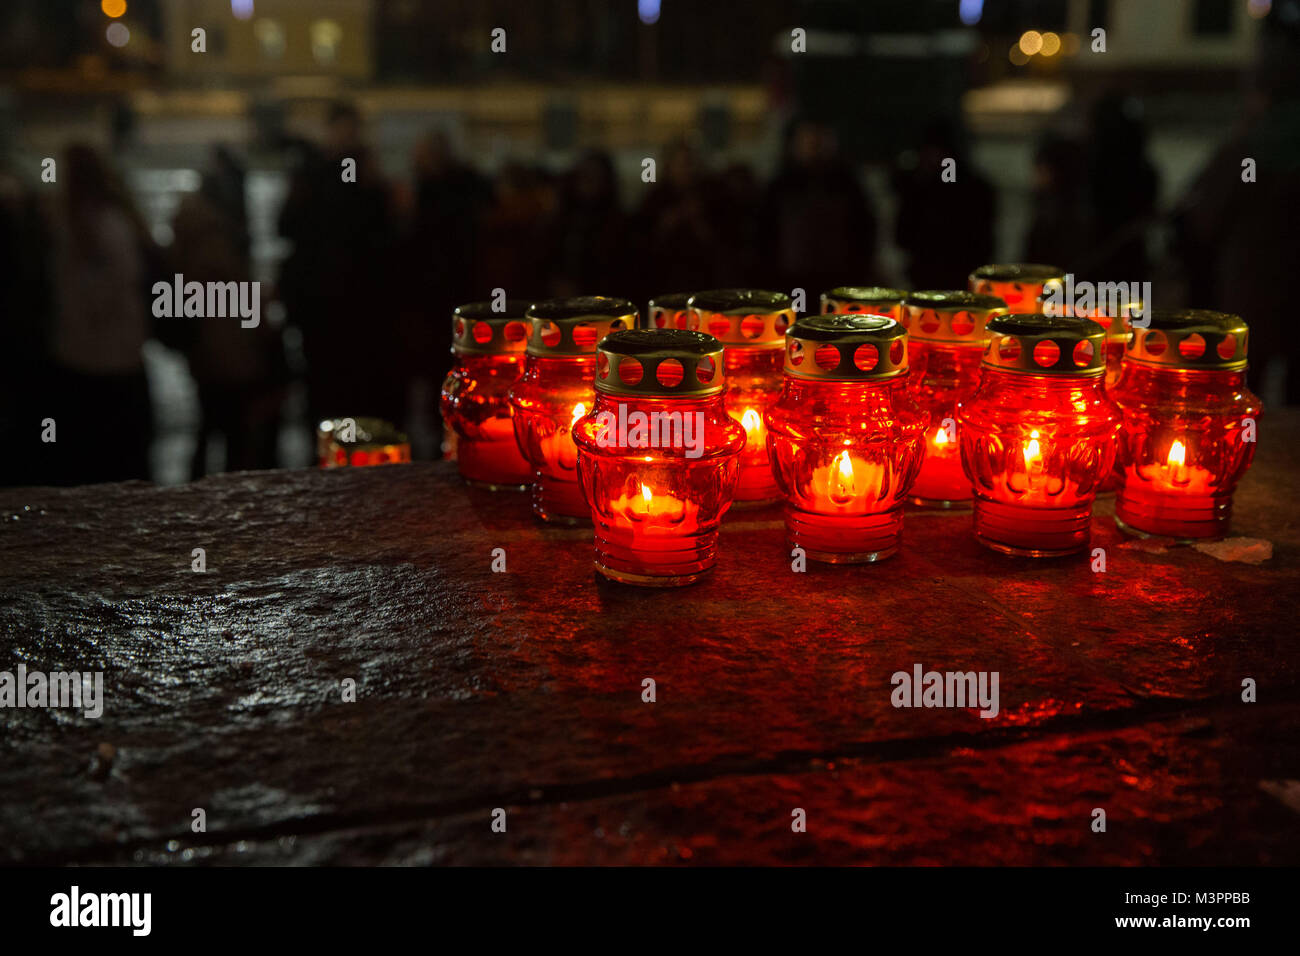 Moscow, Russia. 12th February, 2018. Candles are placed to mourn the victims in the AN-148 passenger jet crash near the Cathedral of Christ the Saviour in Moscow, Russia, on Feb. 12, 2018. Rescuers have presumably recovered the second flight data recorder of the AN-148 passenger jet that crashed in the Moscow region on Sunday, the Russian Emergencies Ministry said Monday. cl Credit: Xinhua/Alamy Live News Stock Photo